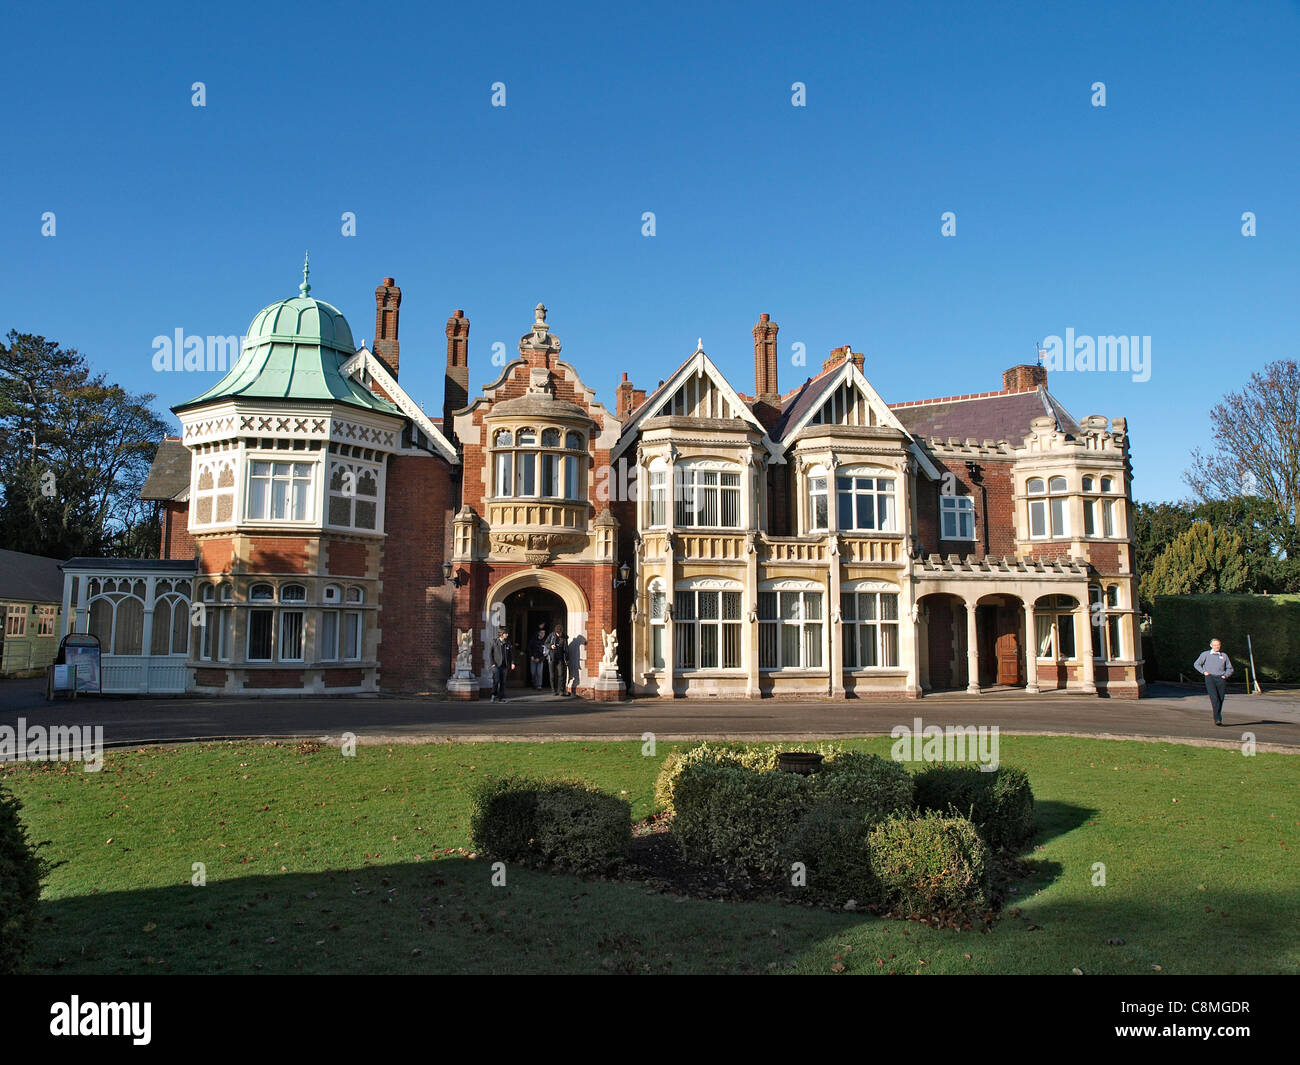 The Mansion, Bletchley Park, Bletchley. Home of the WWII code breakers who cracked Enigma and other codes. Stock Photo